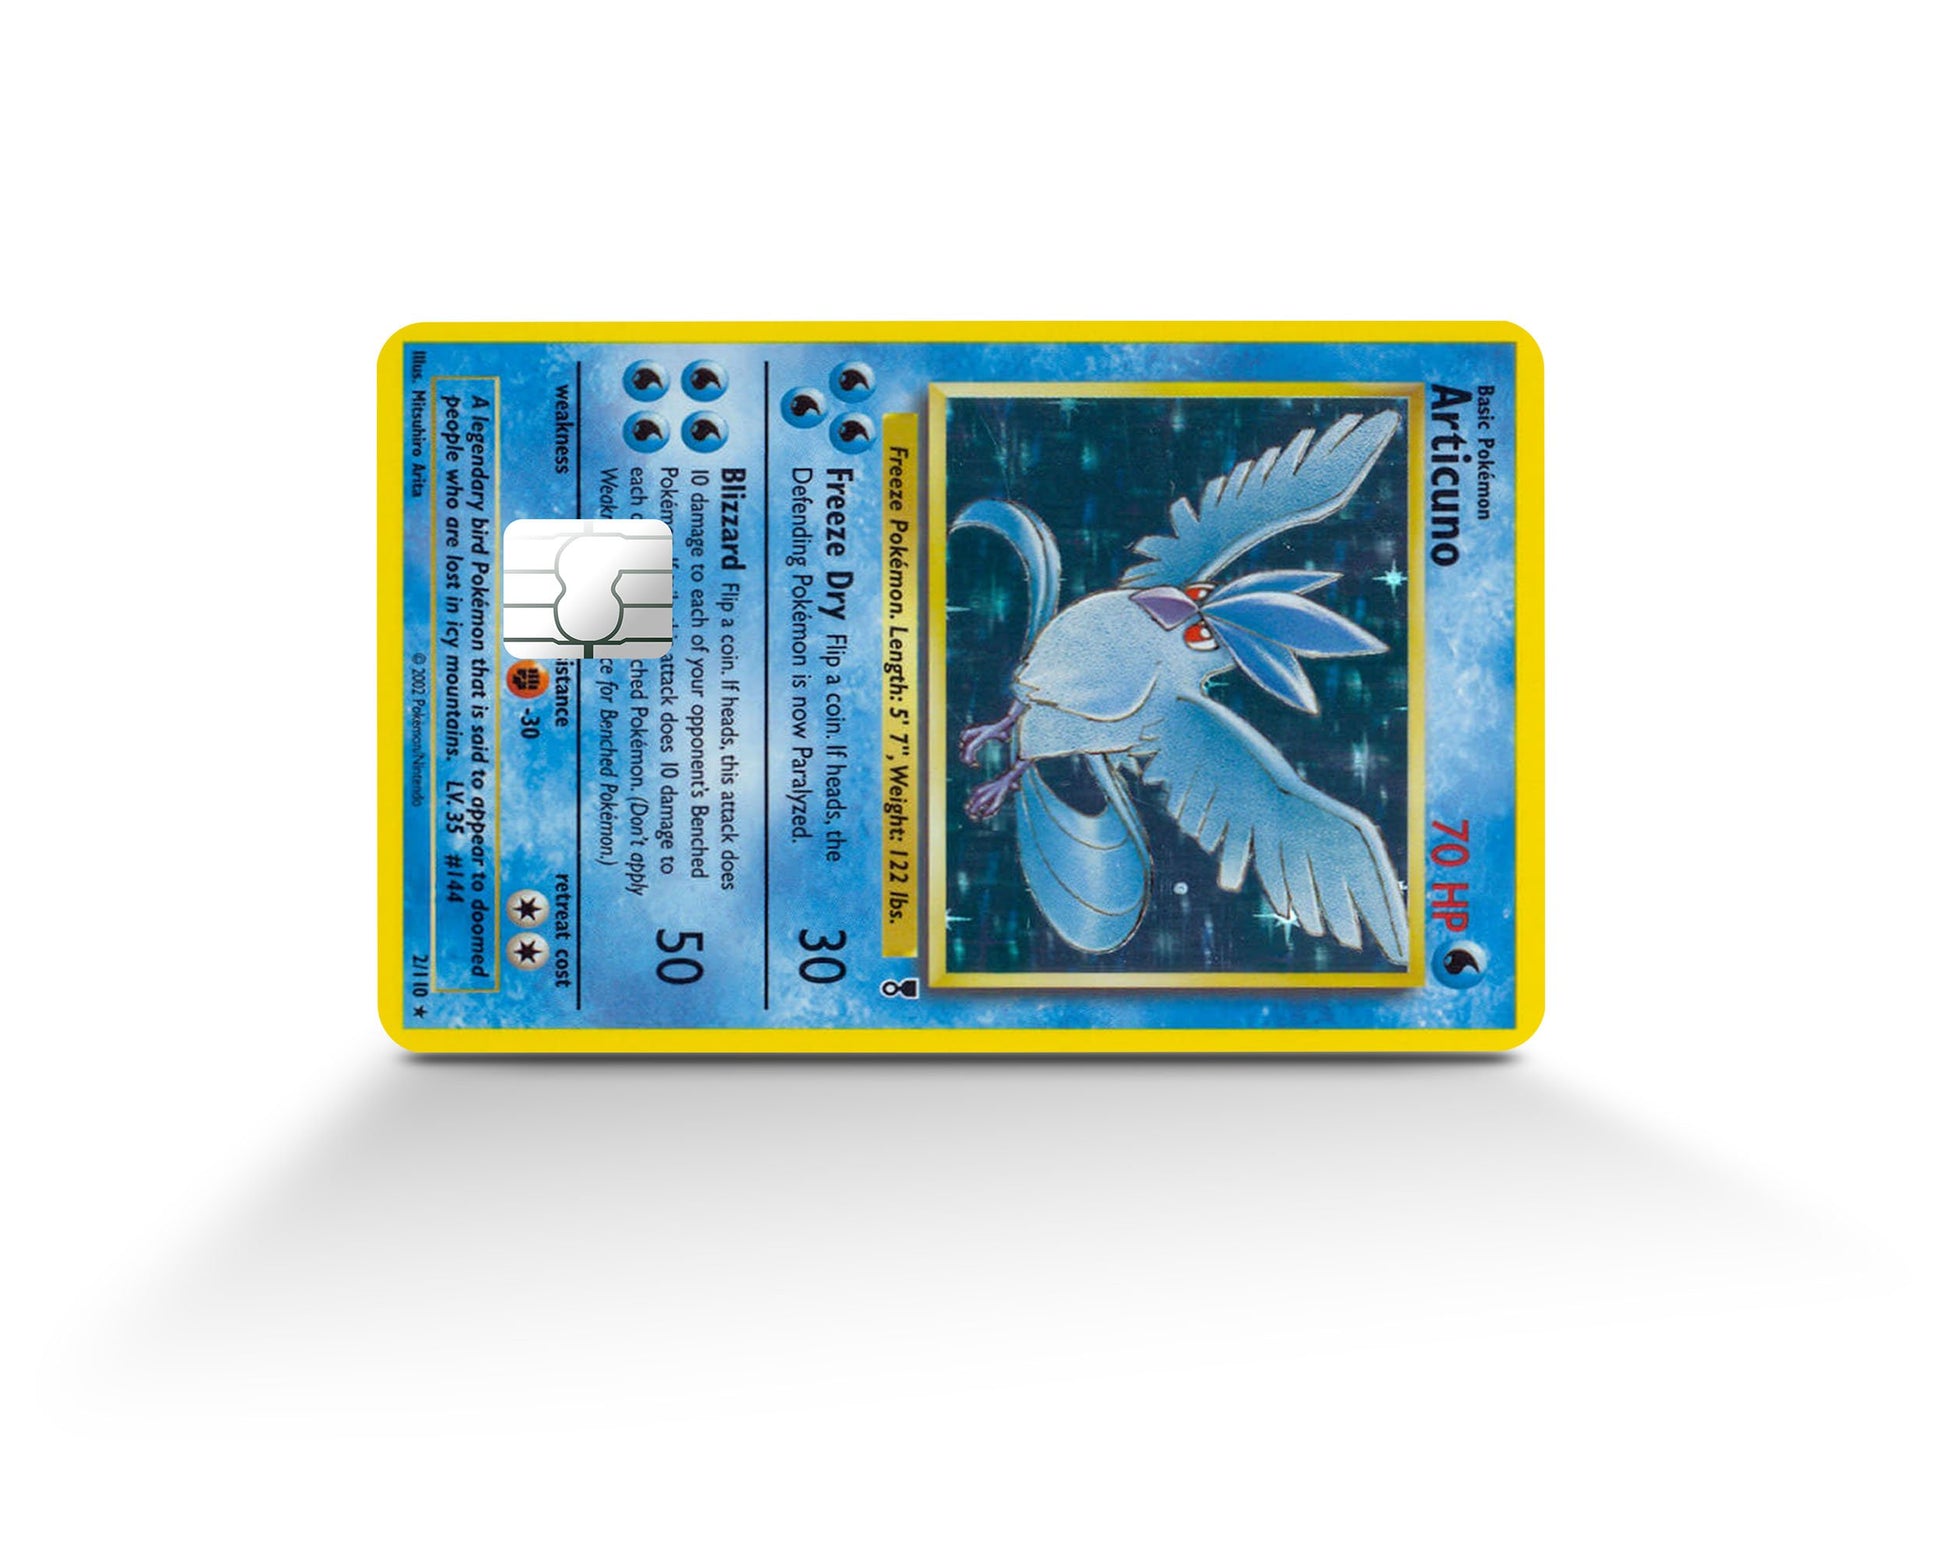 Articuno Pokemon Card Credit Card Skin – Anime Town Creations